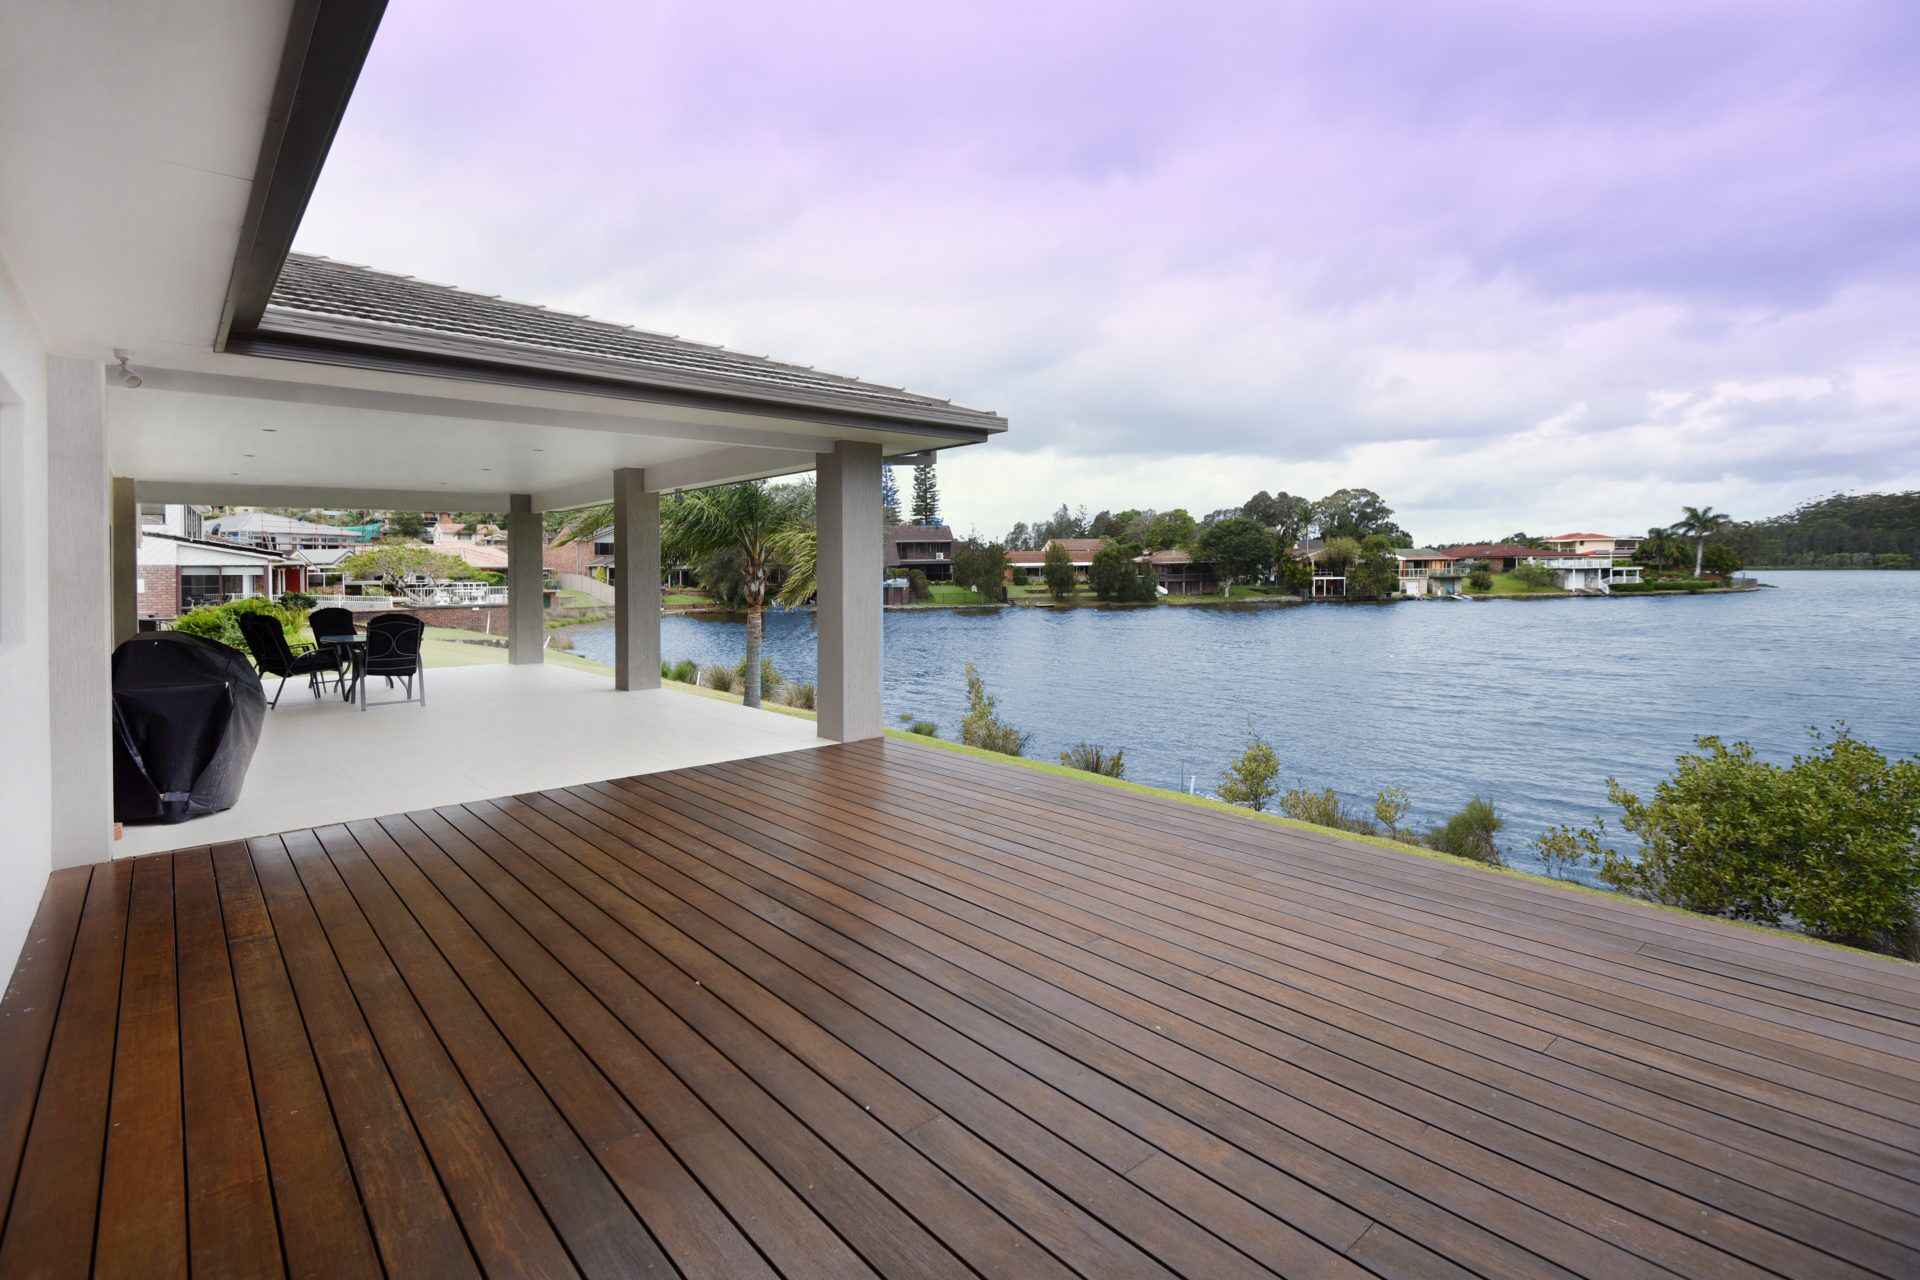 Serenity - Absolute Beauty on the Banks of Bonville Creek